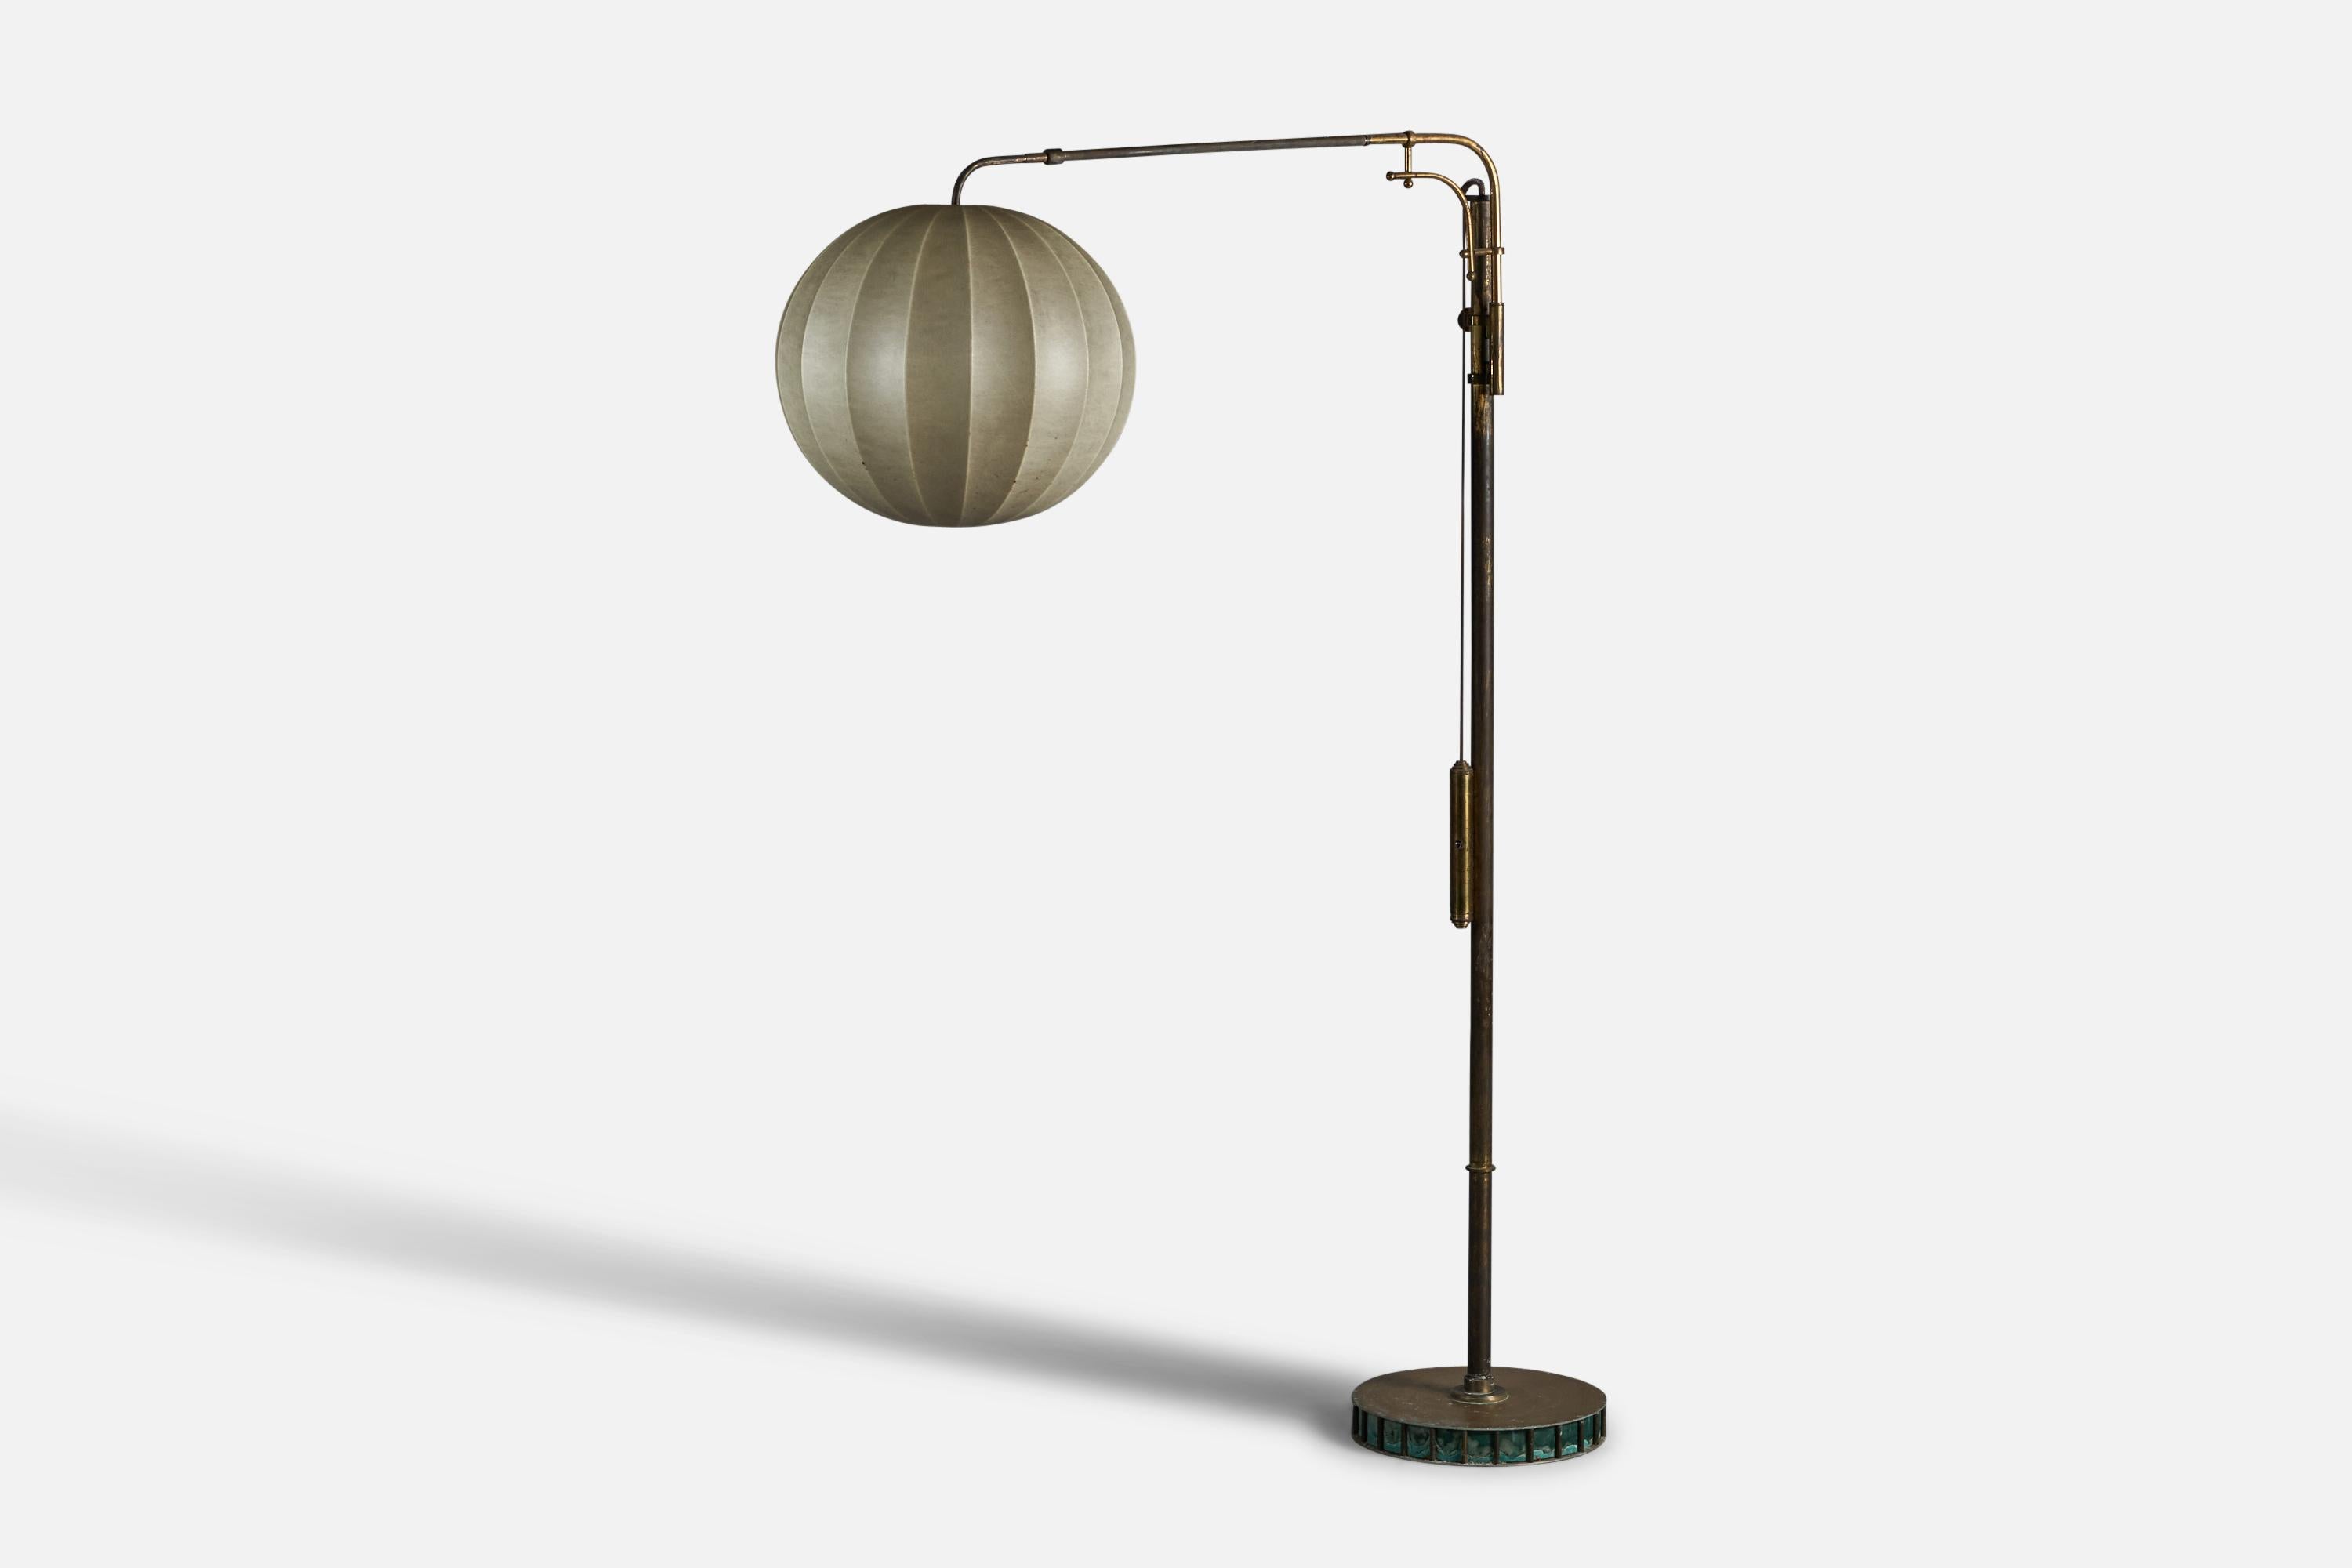 A sizeable adjustable glass, brass and resin floor lamp, design attributed to Angelo Lelii, production attributed to Arredoluce, Italy, 1940s.

Overall Dimensions (inches): 76